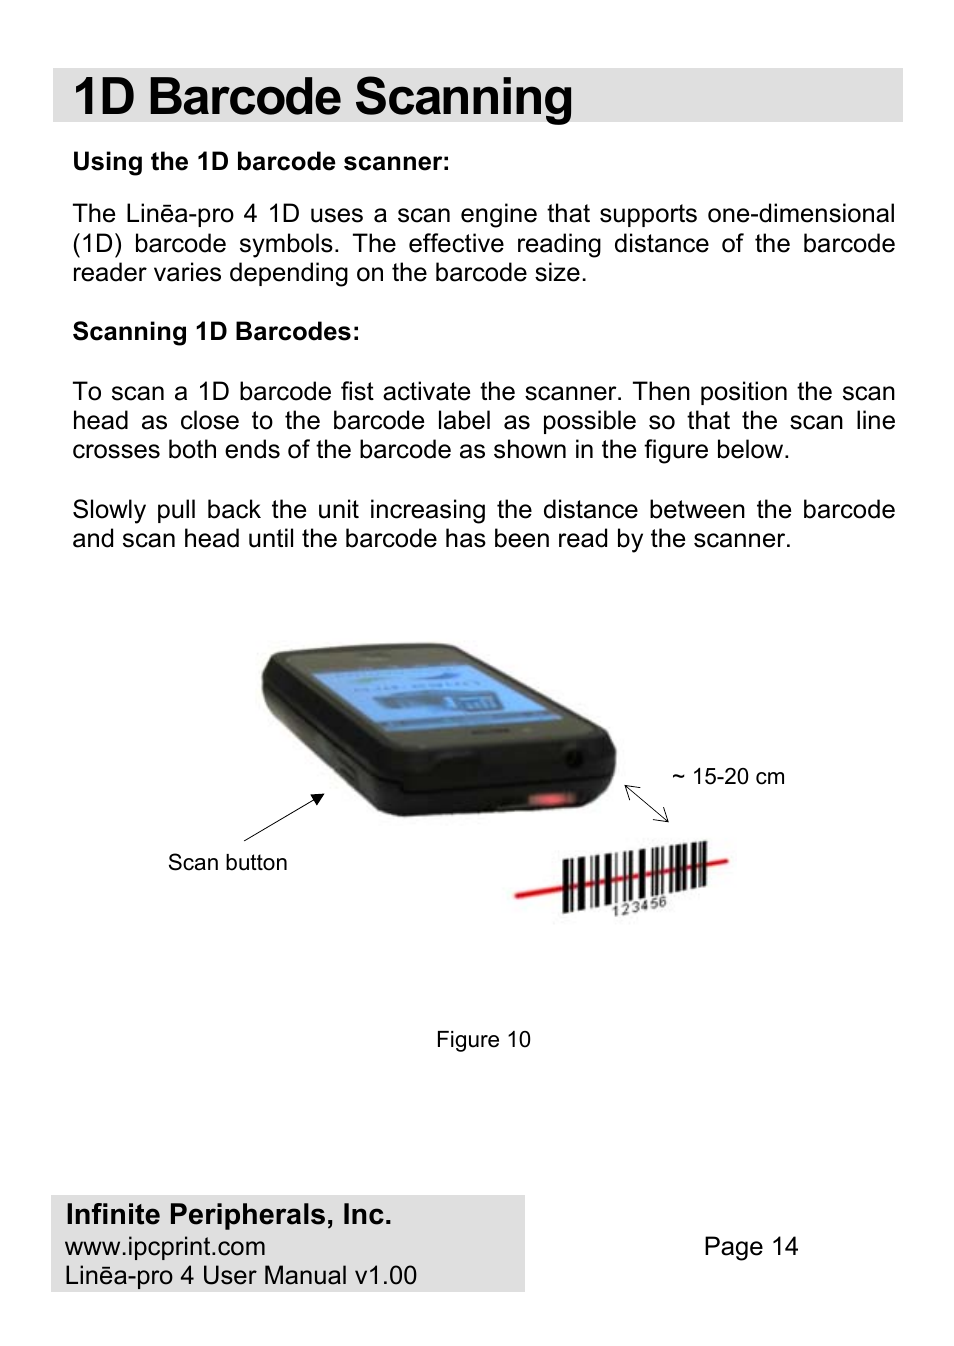 1d barcode scanning | Infinite Peripherals PRO 4 User Manual | Page 14 / 24